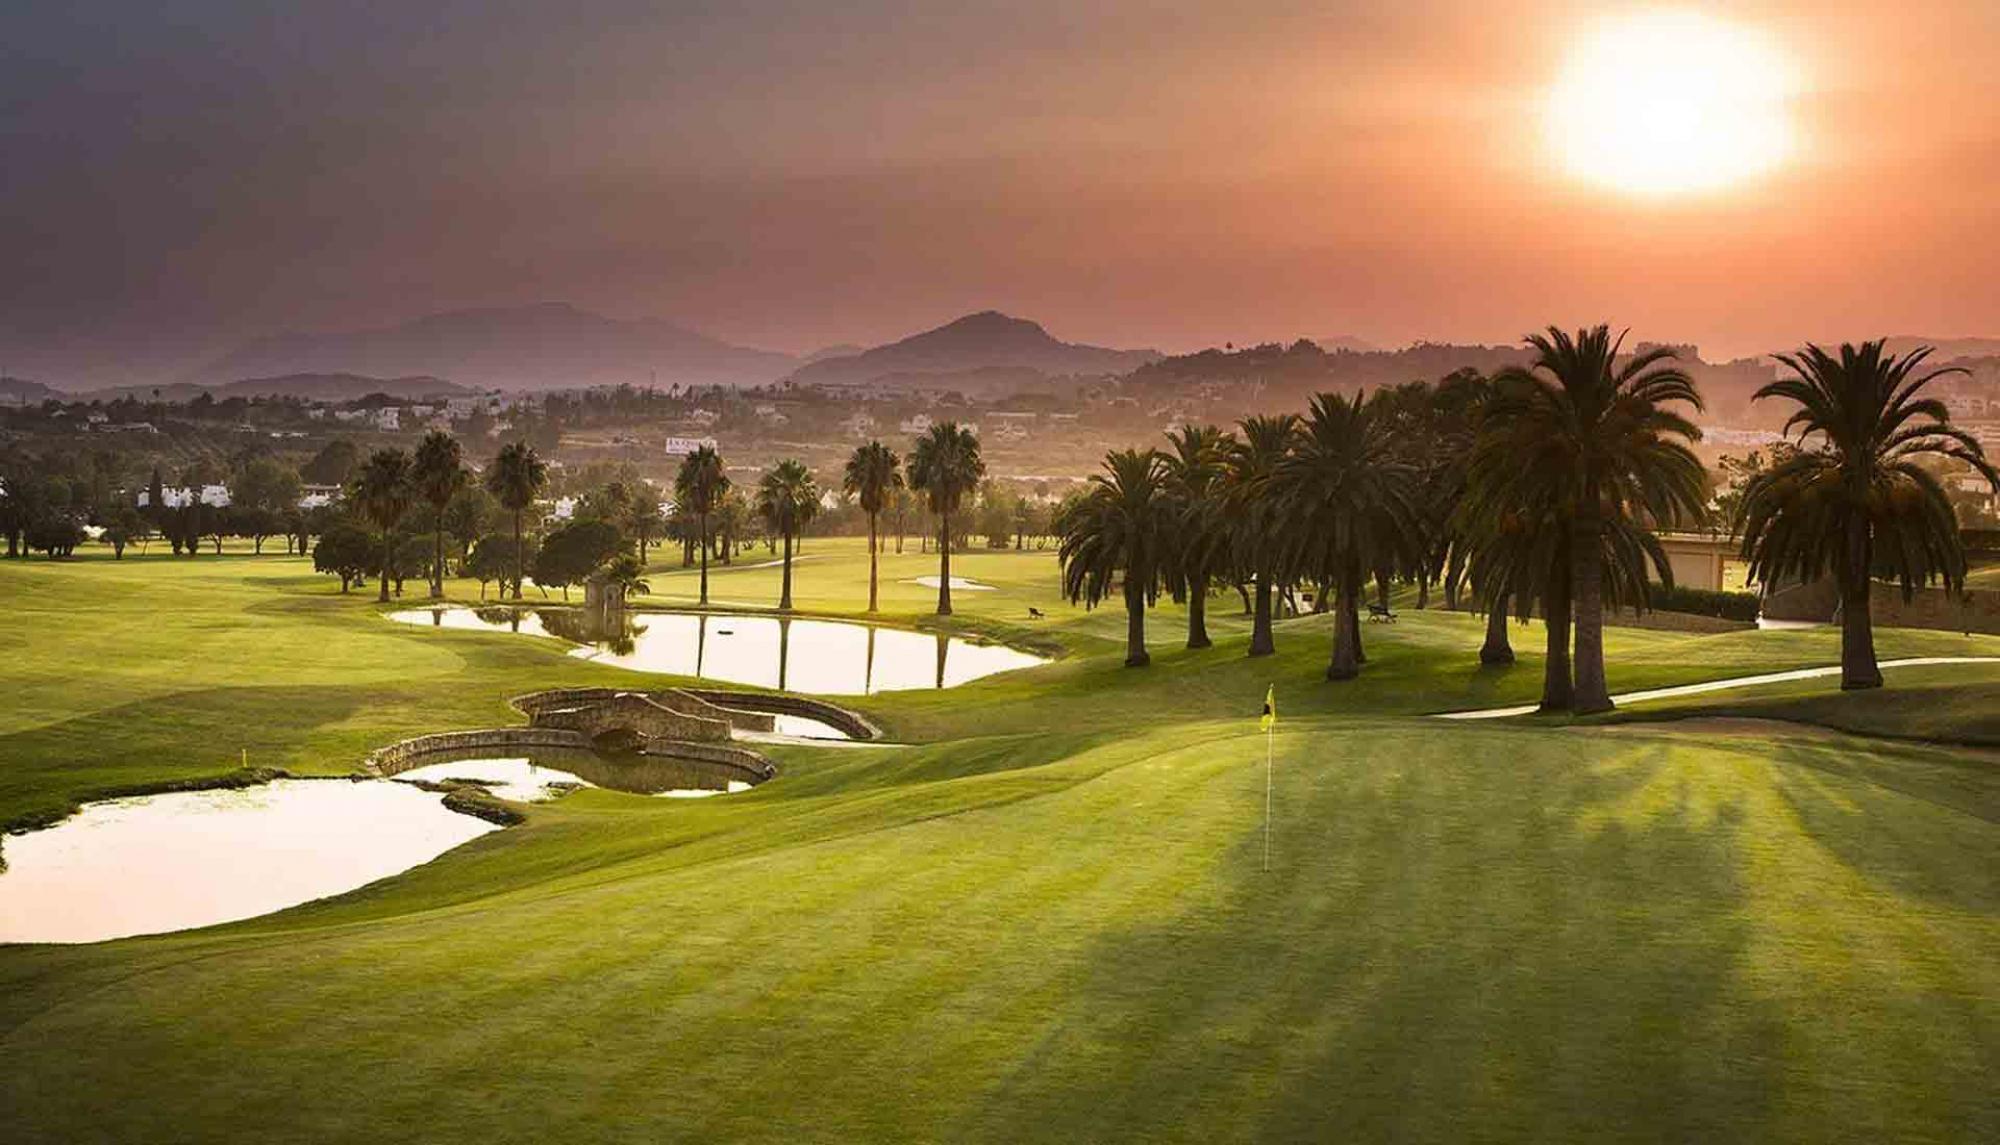 The Double Tree By Hilton Hotel Emporda  Spa's lovely golf course within stunning Costa Brava.